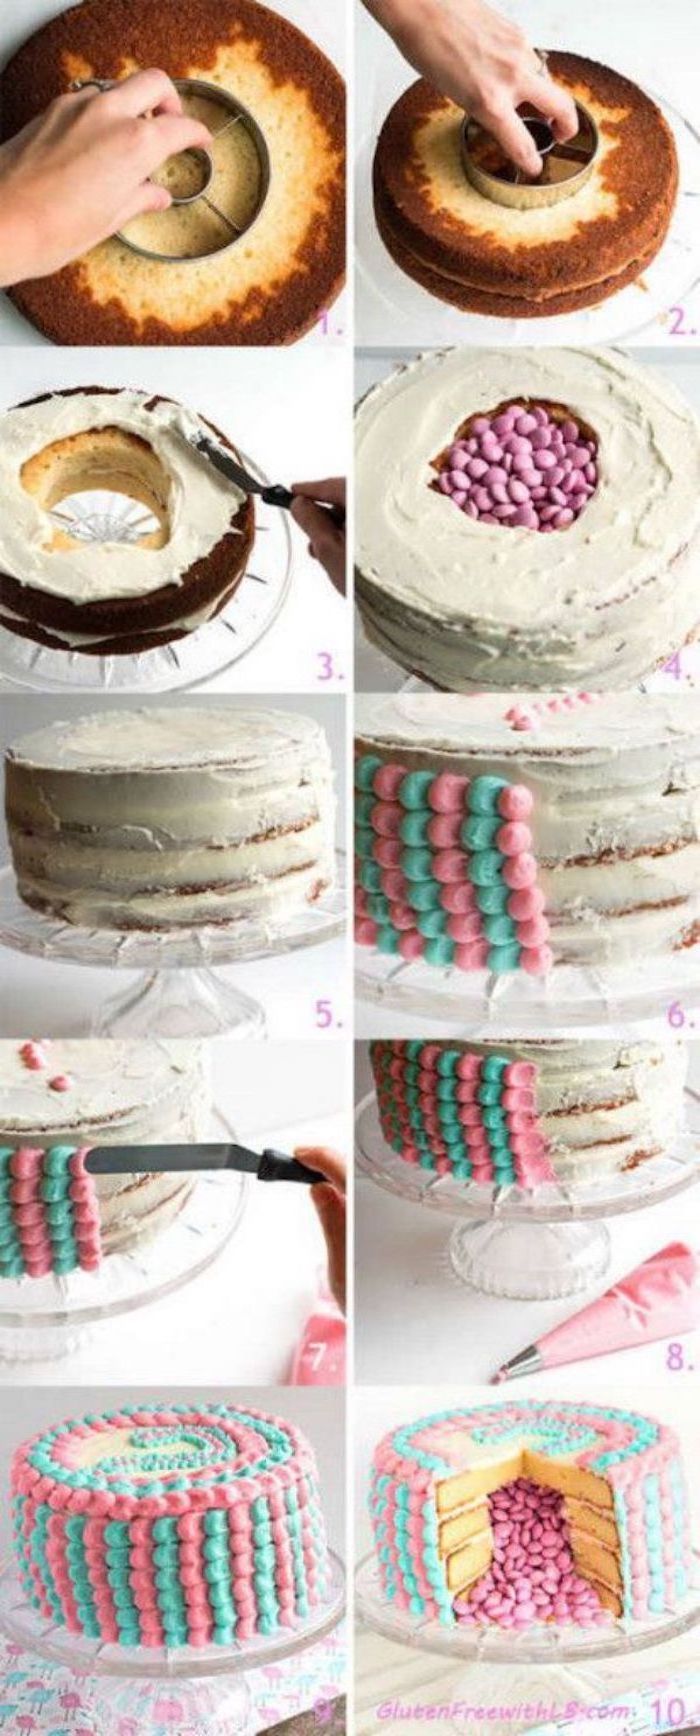 step by step, diy tutorial, gender reveal balloons, small cake, pink and white frosting, pink candy inside